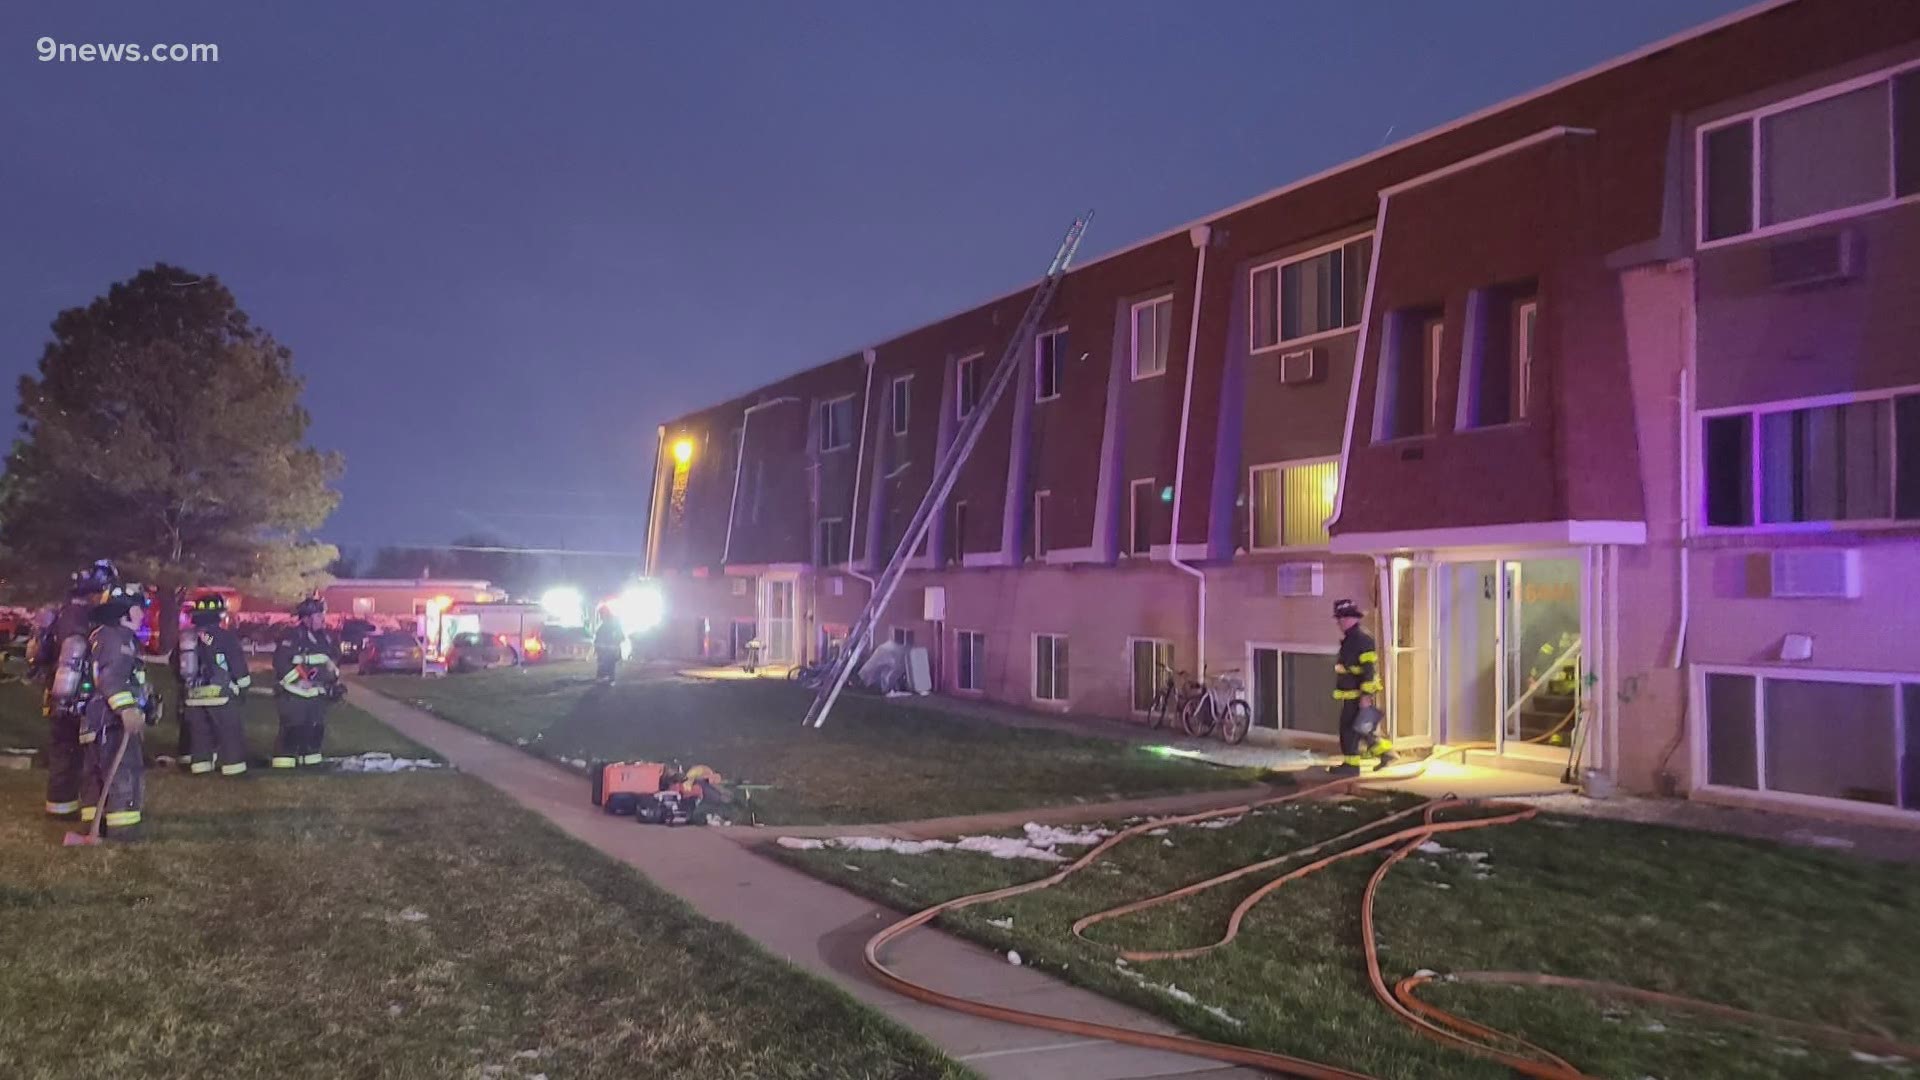 About 20 people are displaced following an early morning fire at the complex on East 17th Place in Aurora.